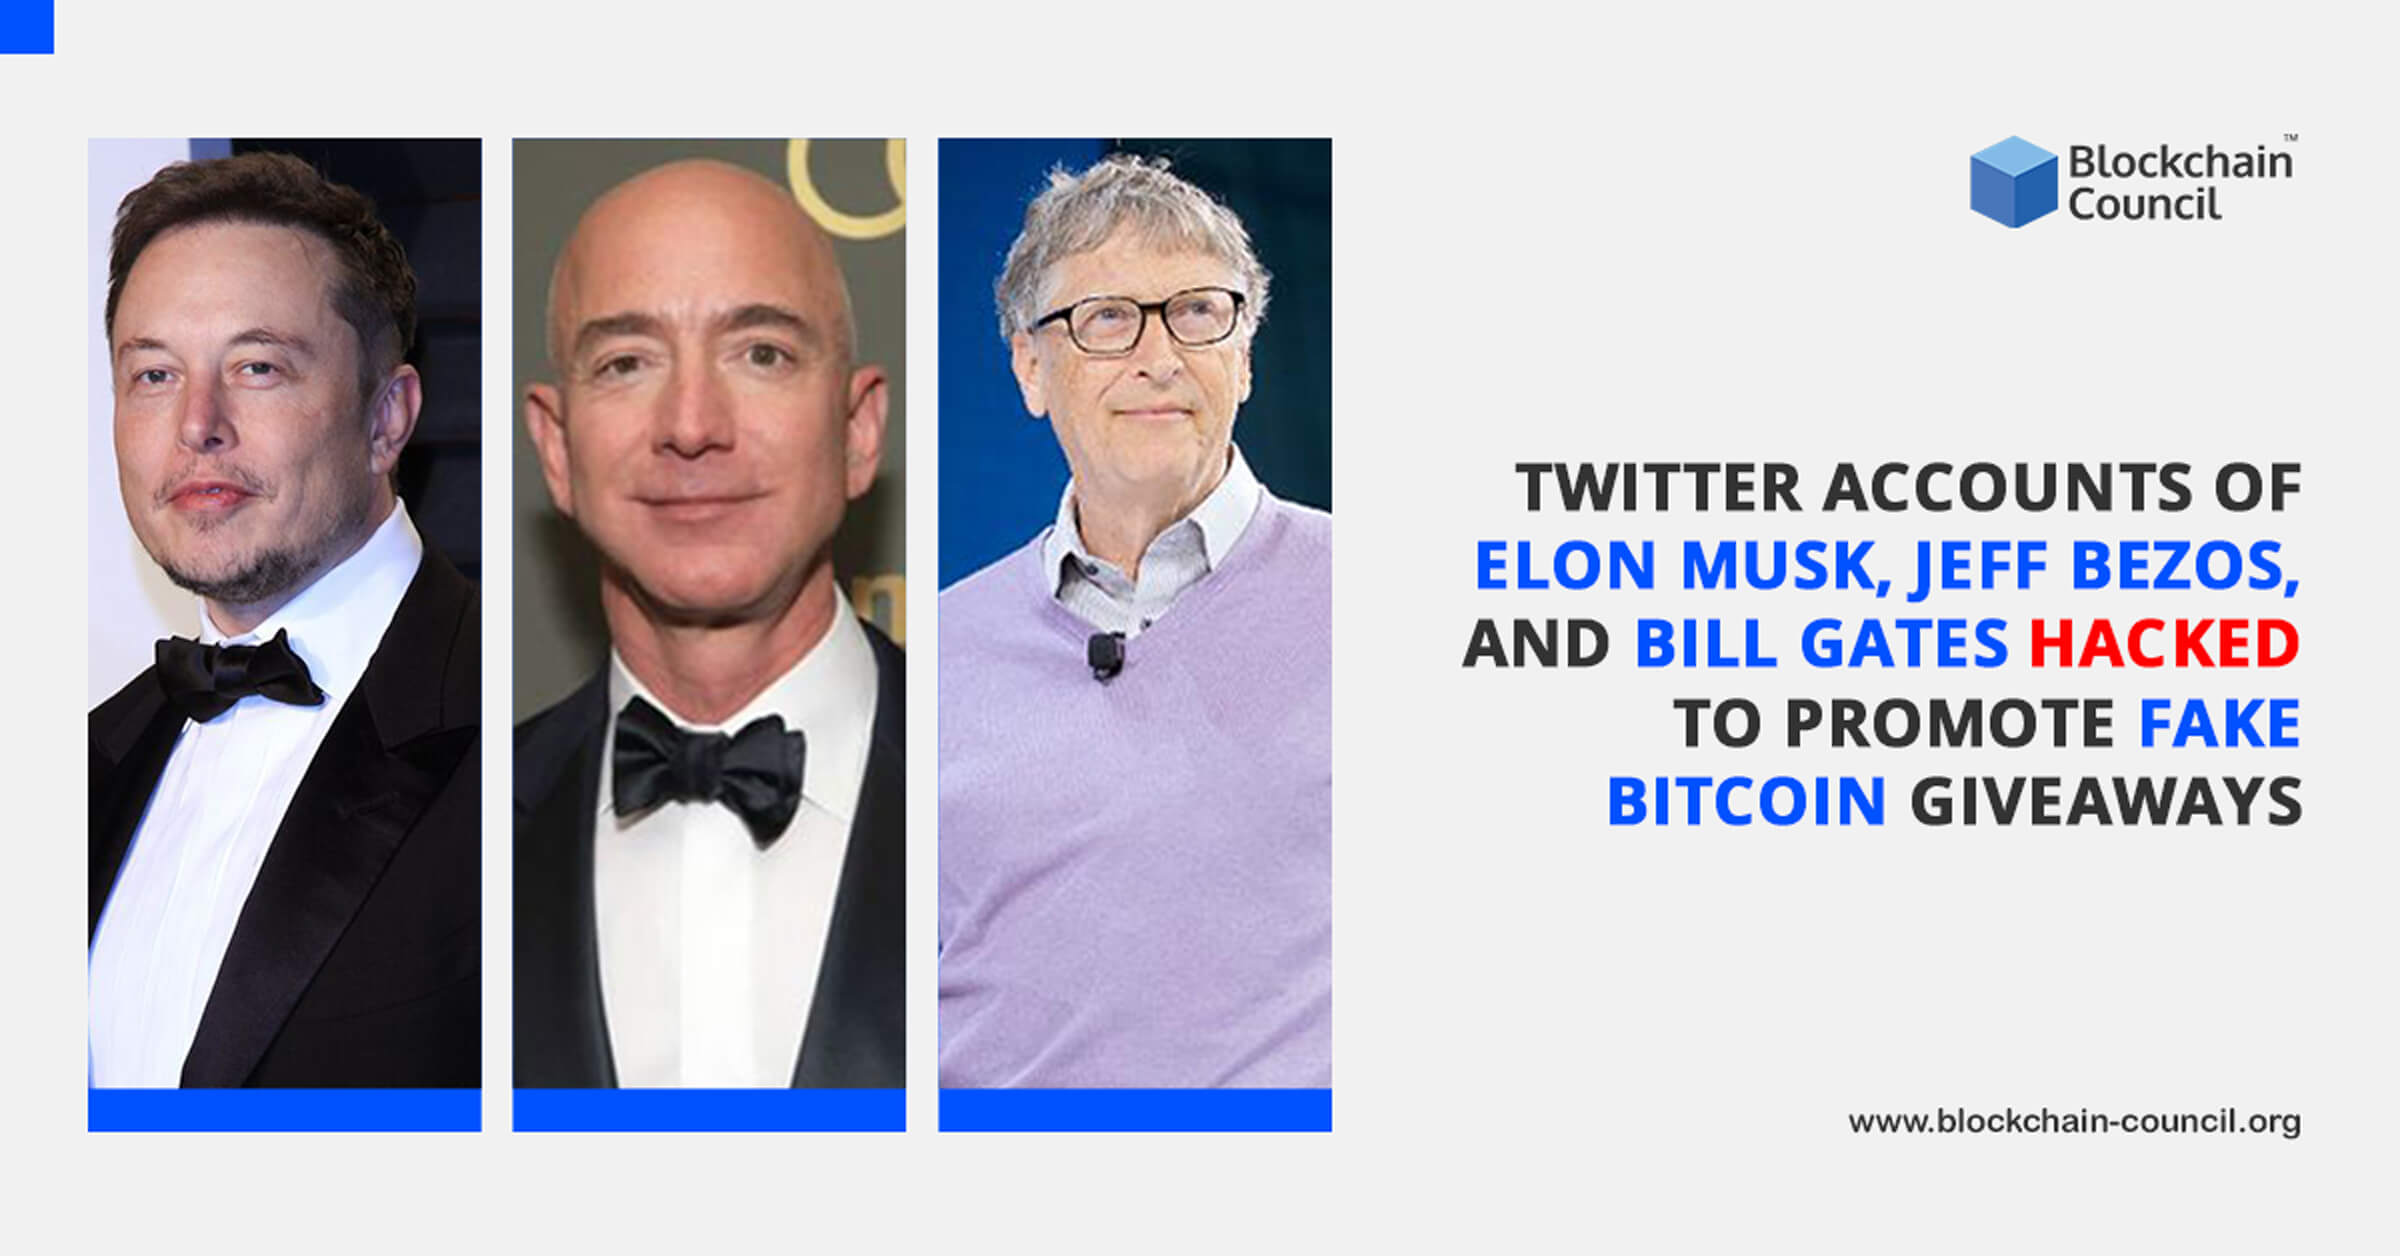 Twitter Accounts of Elon Musk, Jeff Bezos, and Bill Gates Hacked to Promote Fake Bitcoin Giveaways